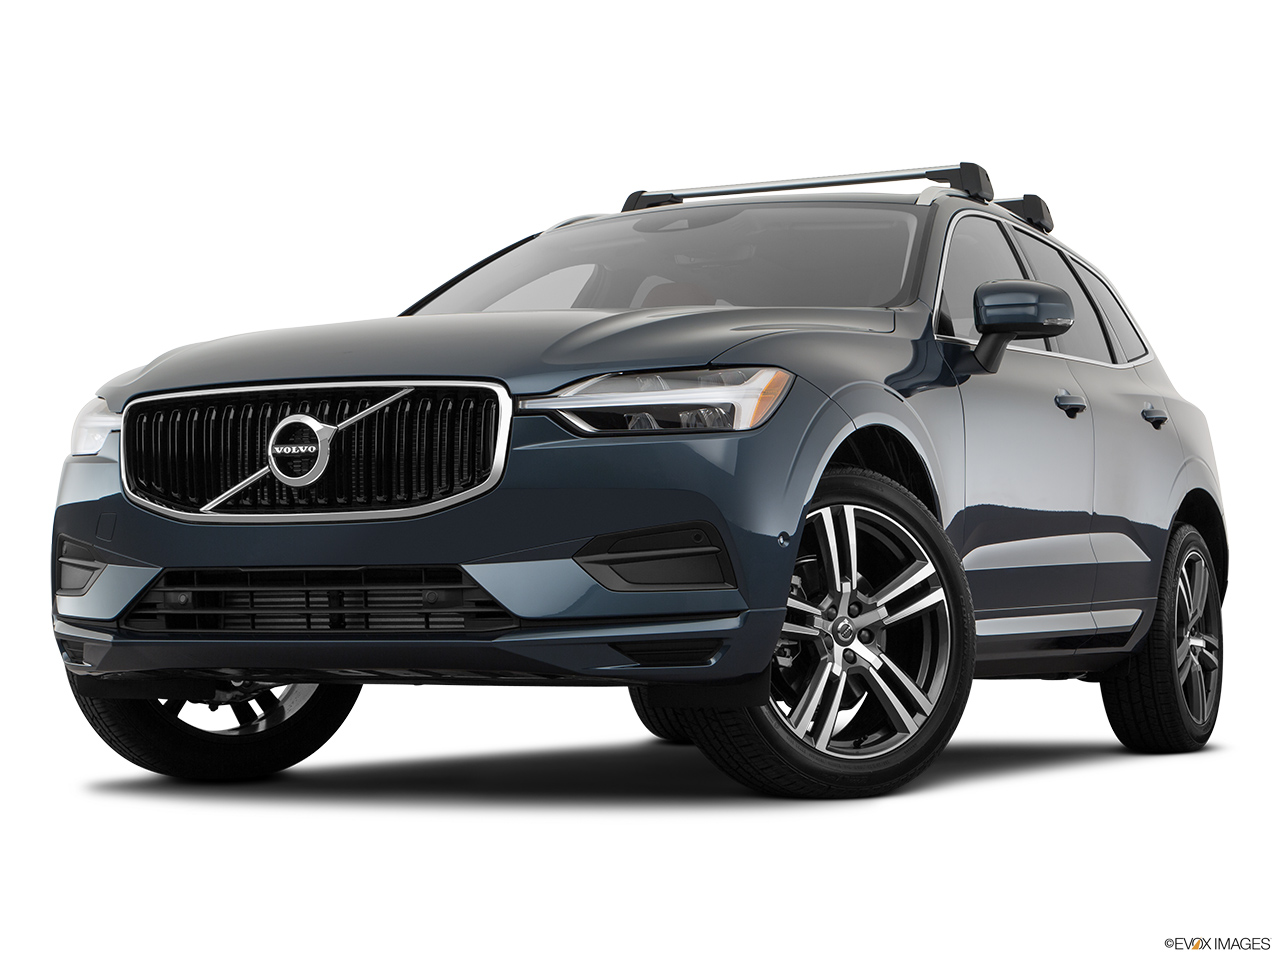 2018 Volvo XC60 T5 Momentum Front angle view, low wide perspective. 